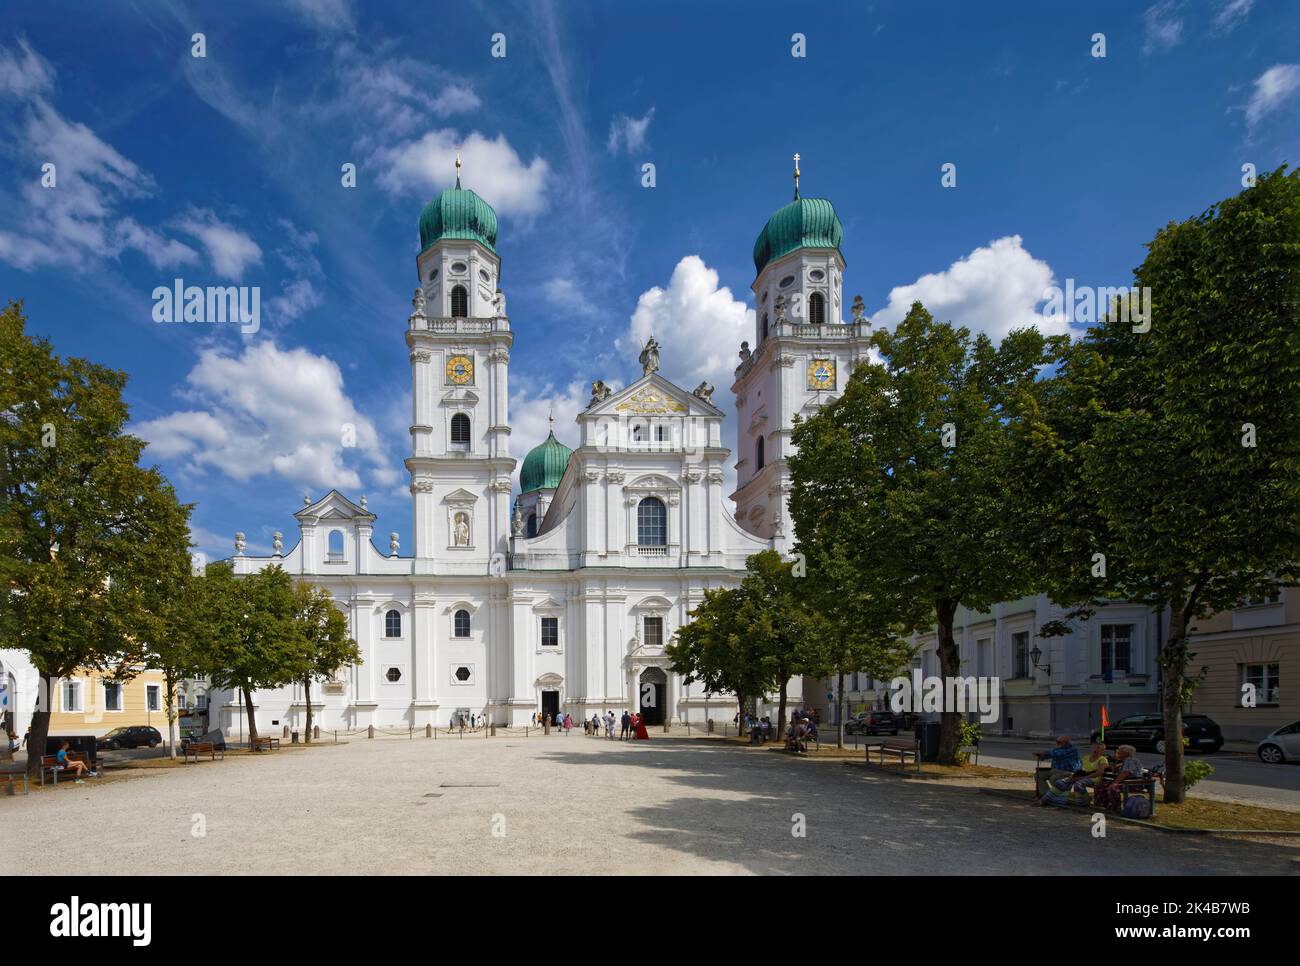 St. Stephen's Cathedral, Baroque, built from 1668-1693, Episcopal Church, Catholic, Cathedral Square, Old Town, Three Rivers City of Passau Stock Photo